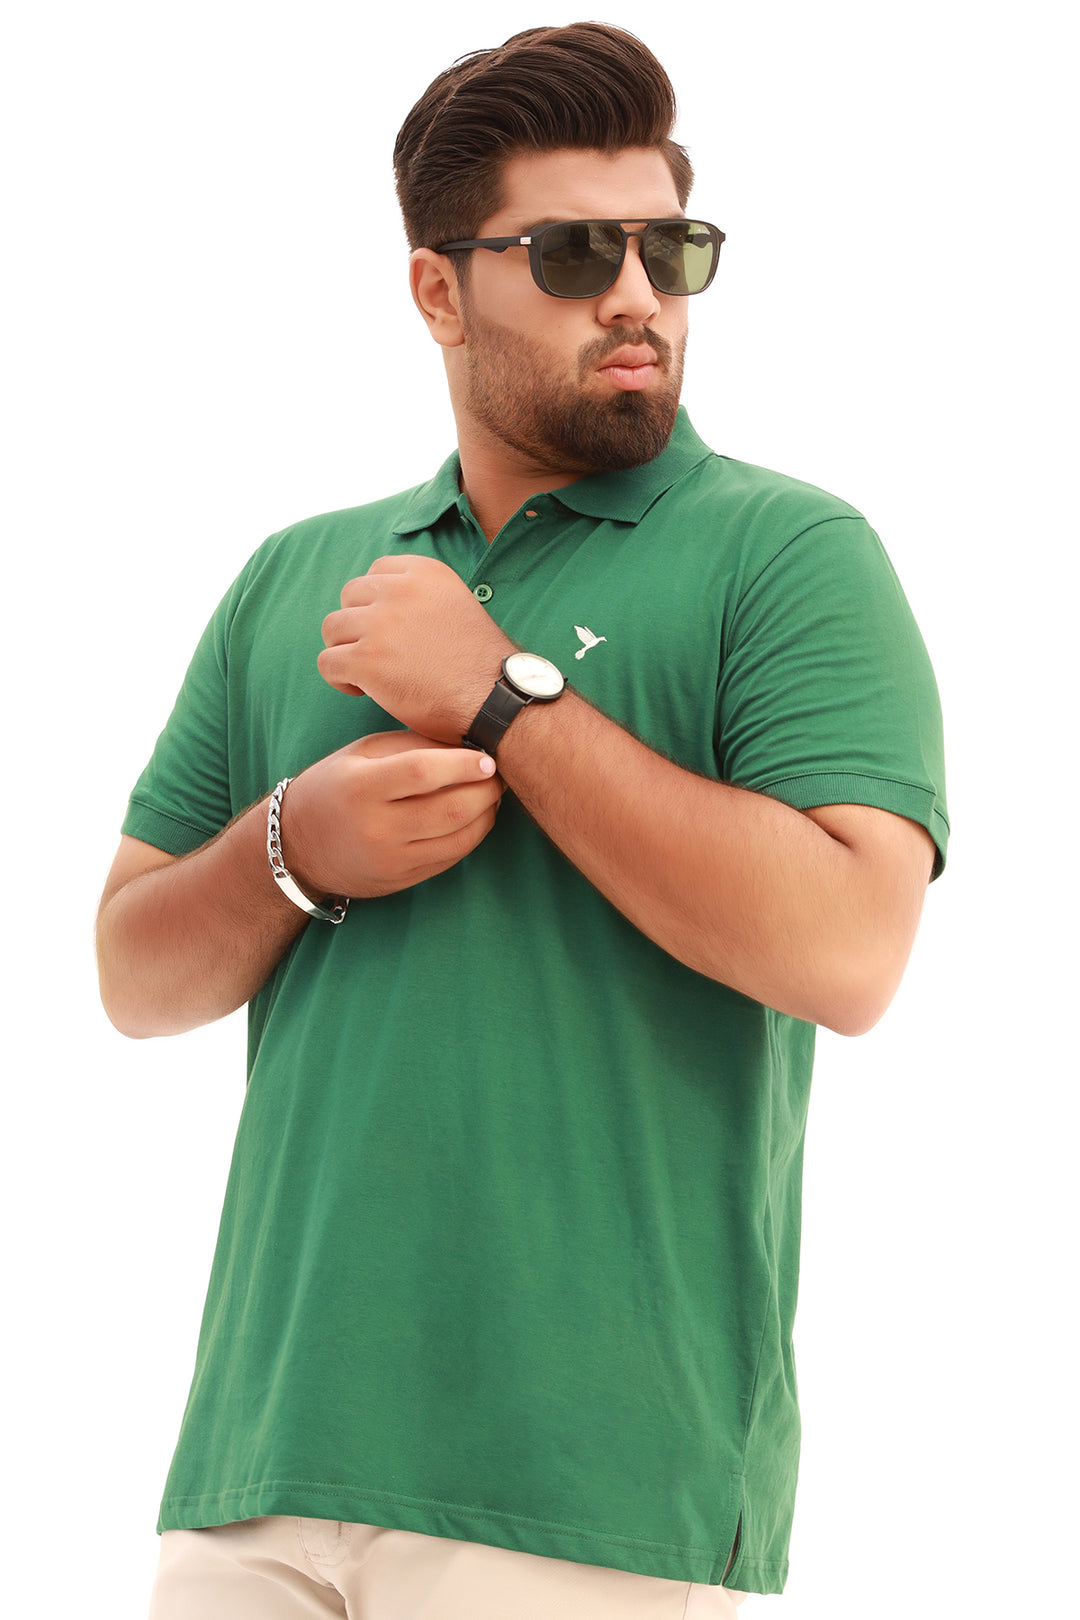 Pasture Green Embroidered Polo Shirt (Plus Size) - S22 - MP0111P